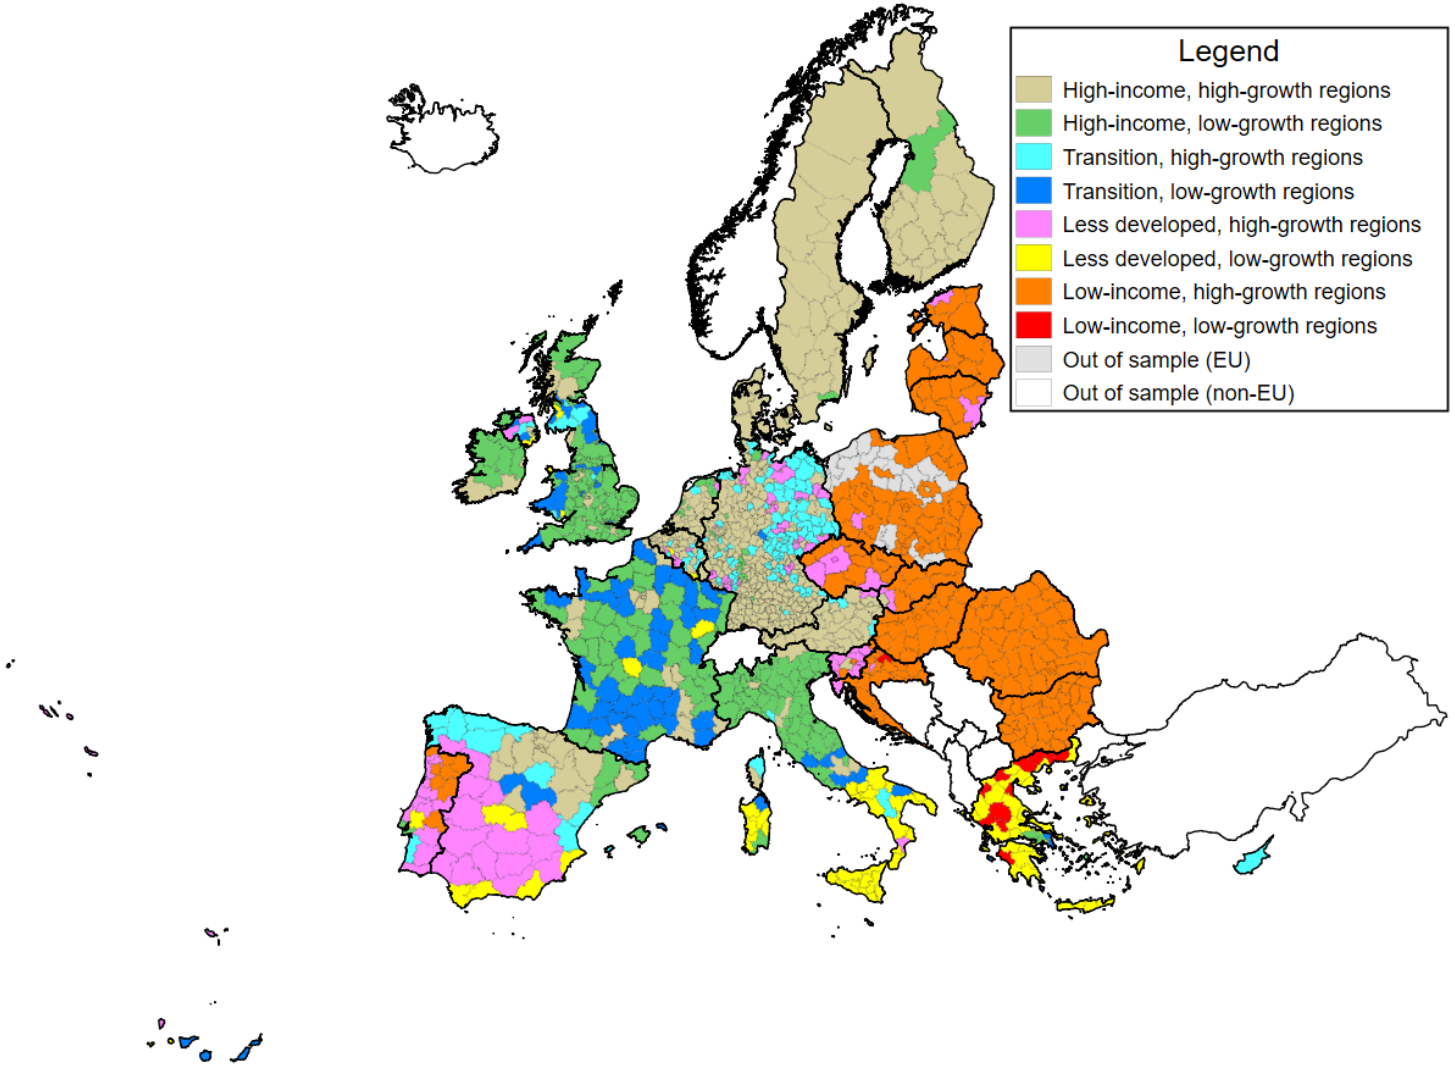 How do small regions in Europe achieve growth?